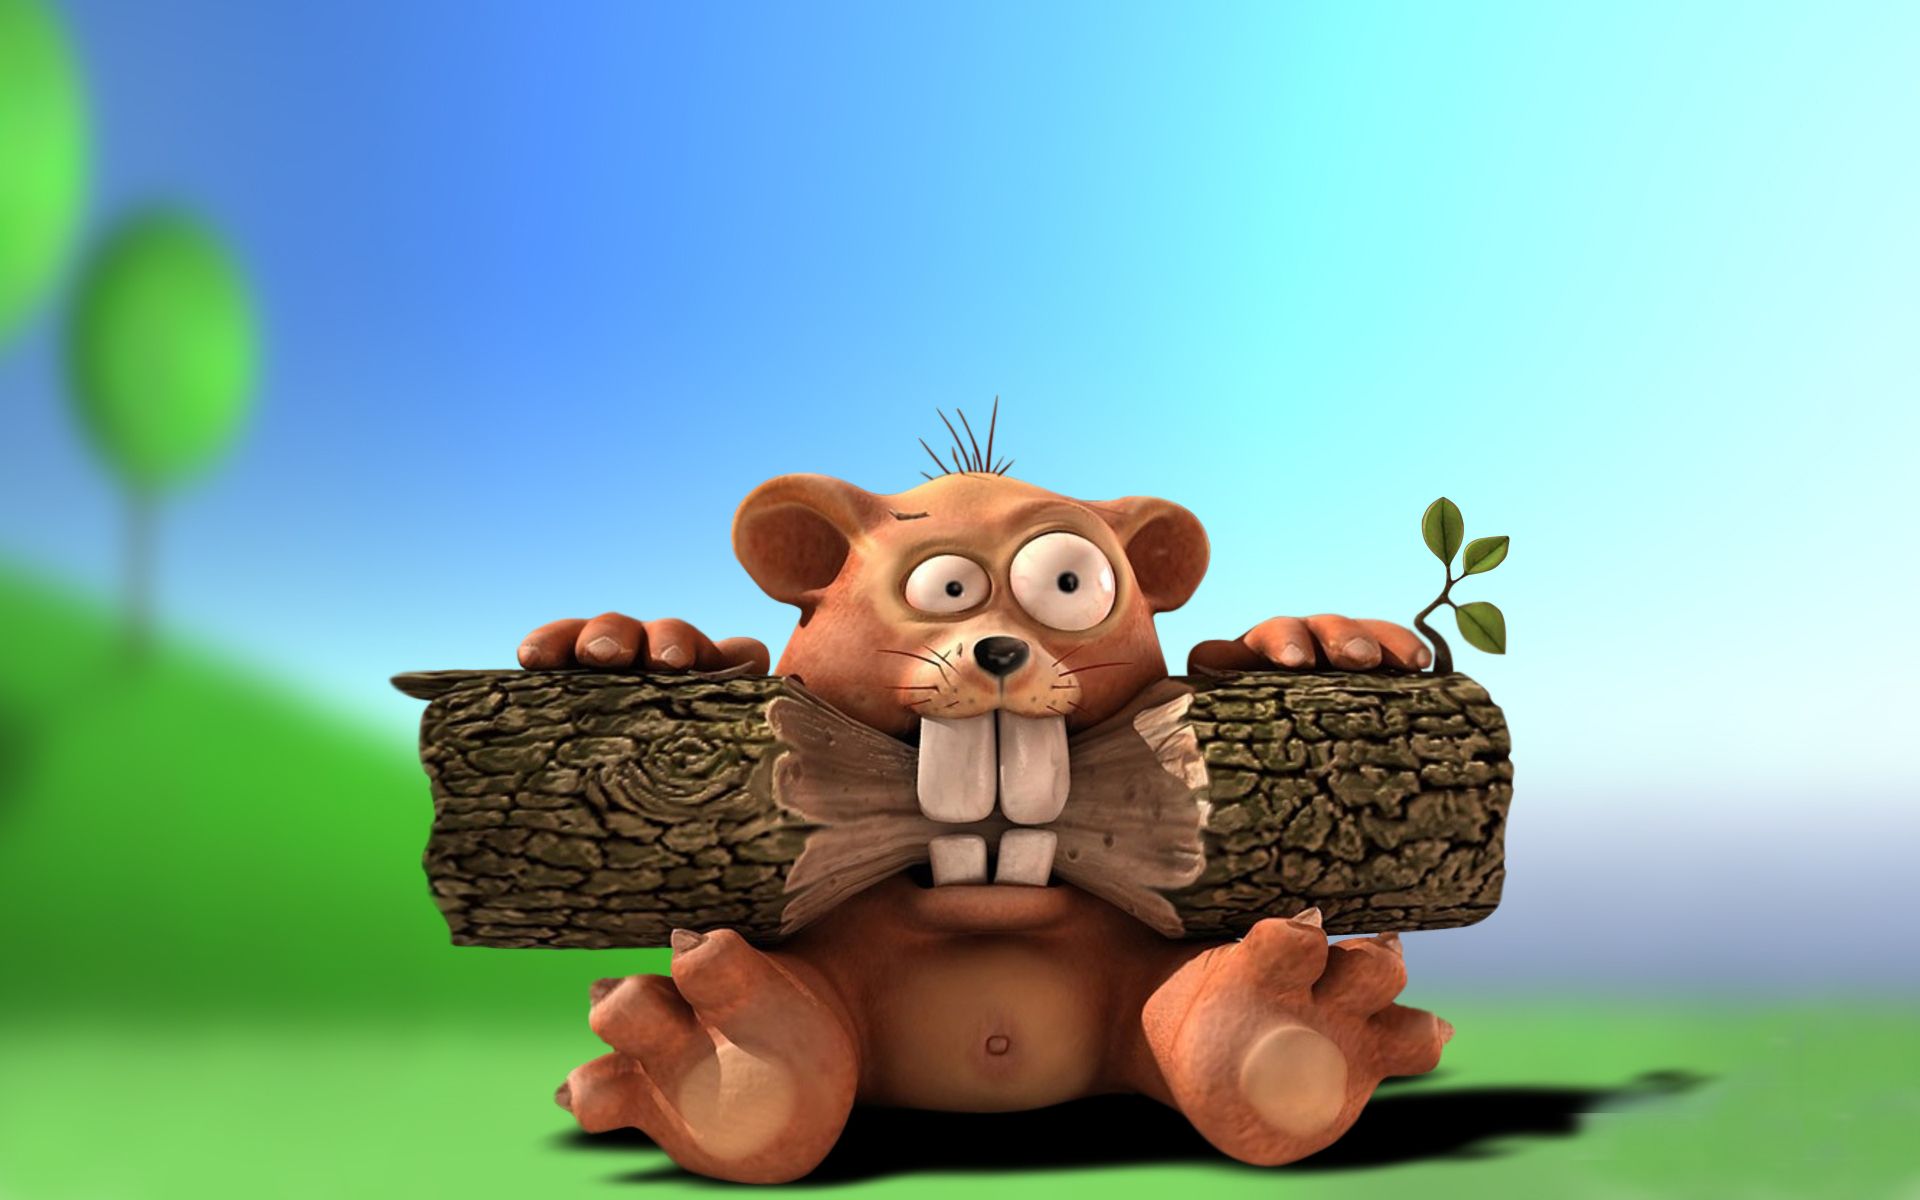 Funny Angry Beaver Character Cartoon Wal - Cartoon Wallpaper For Laptop Hd , HD Wallpaper & Backgrounds